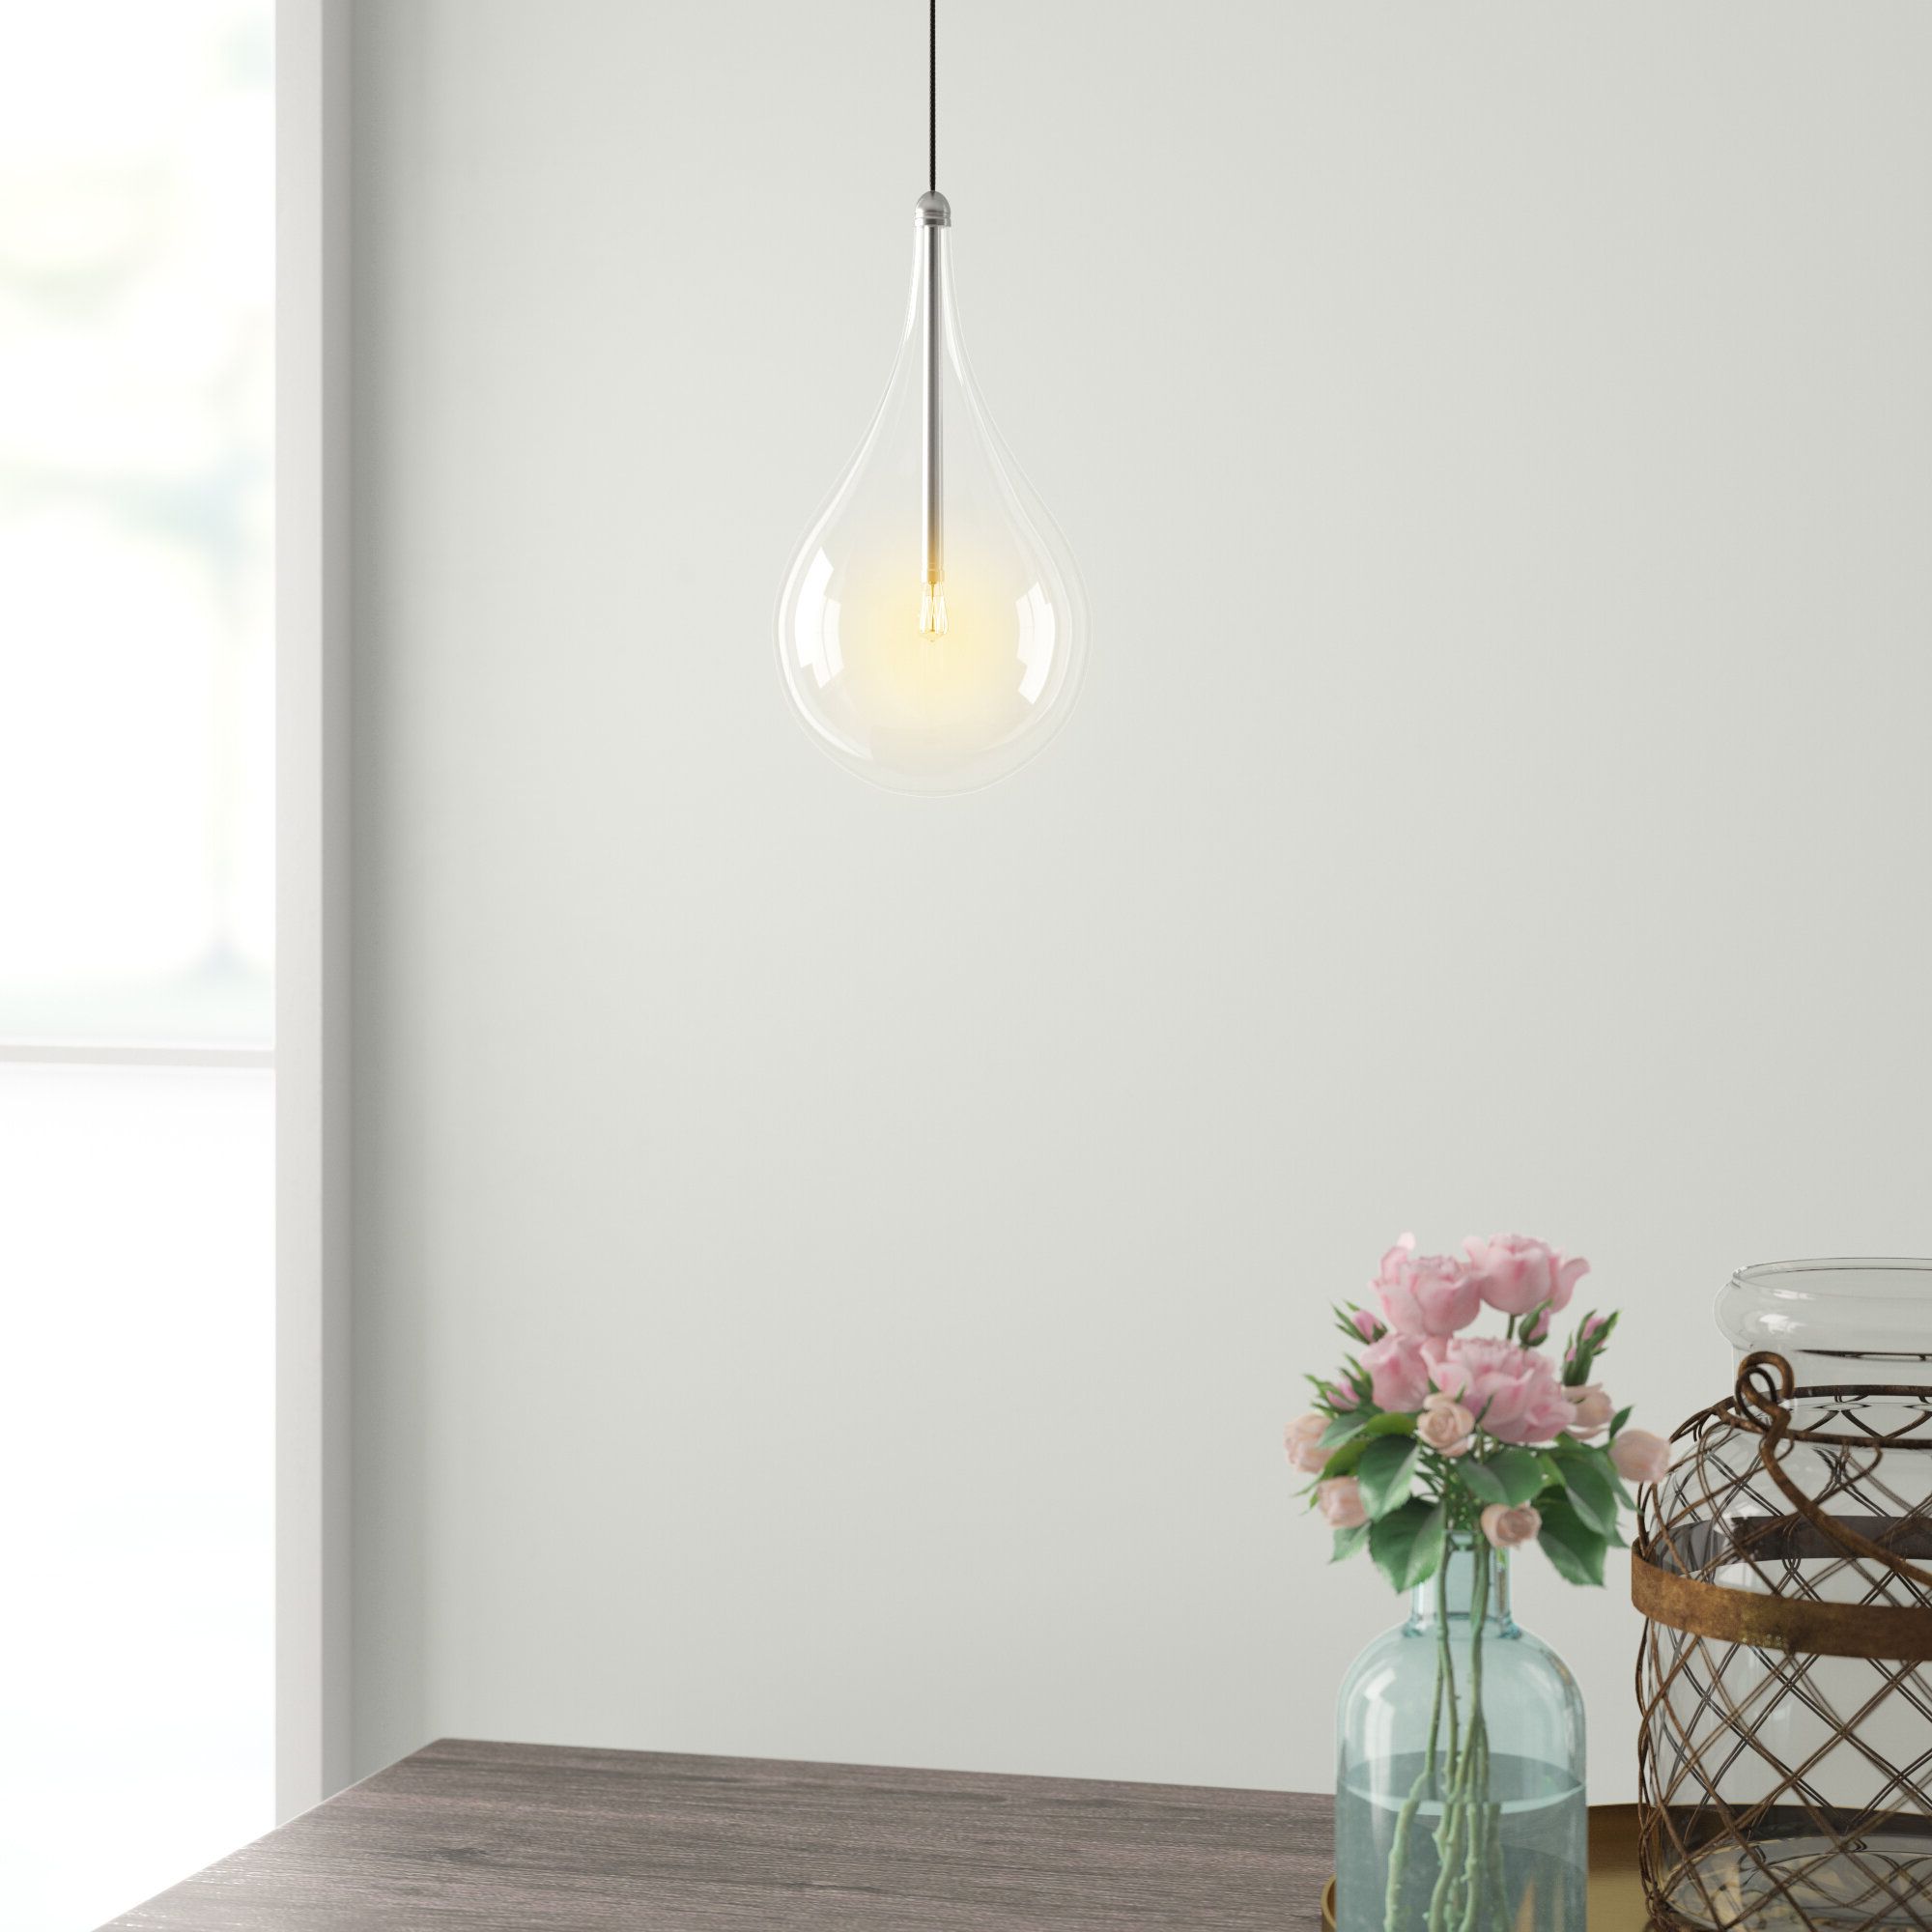 Preferred Knoxville 1 Light Single Teardrop Pendants Regarding Neal 1 Light Single Teardrop Pendant (View 8 of 20)